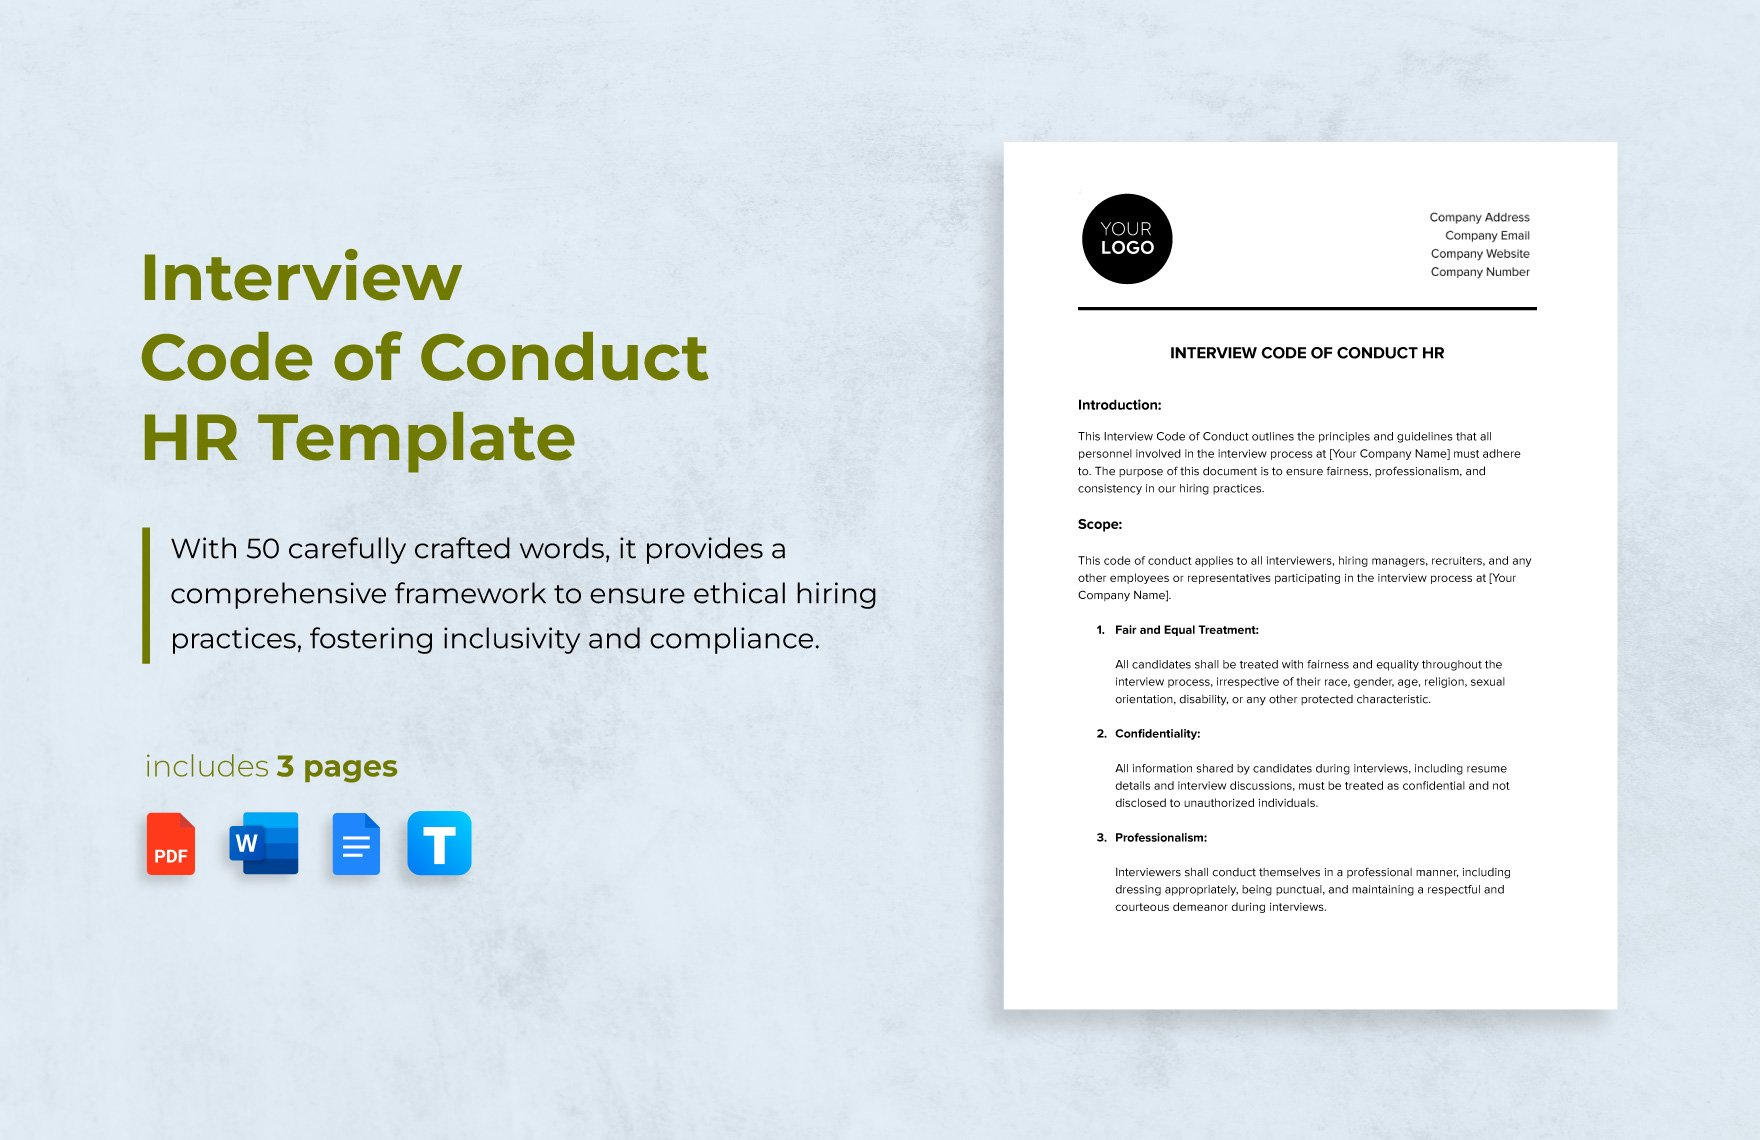 Interview Code Of Conduct HR Template